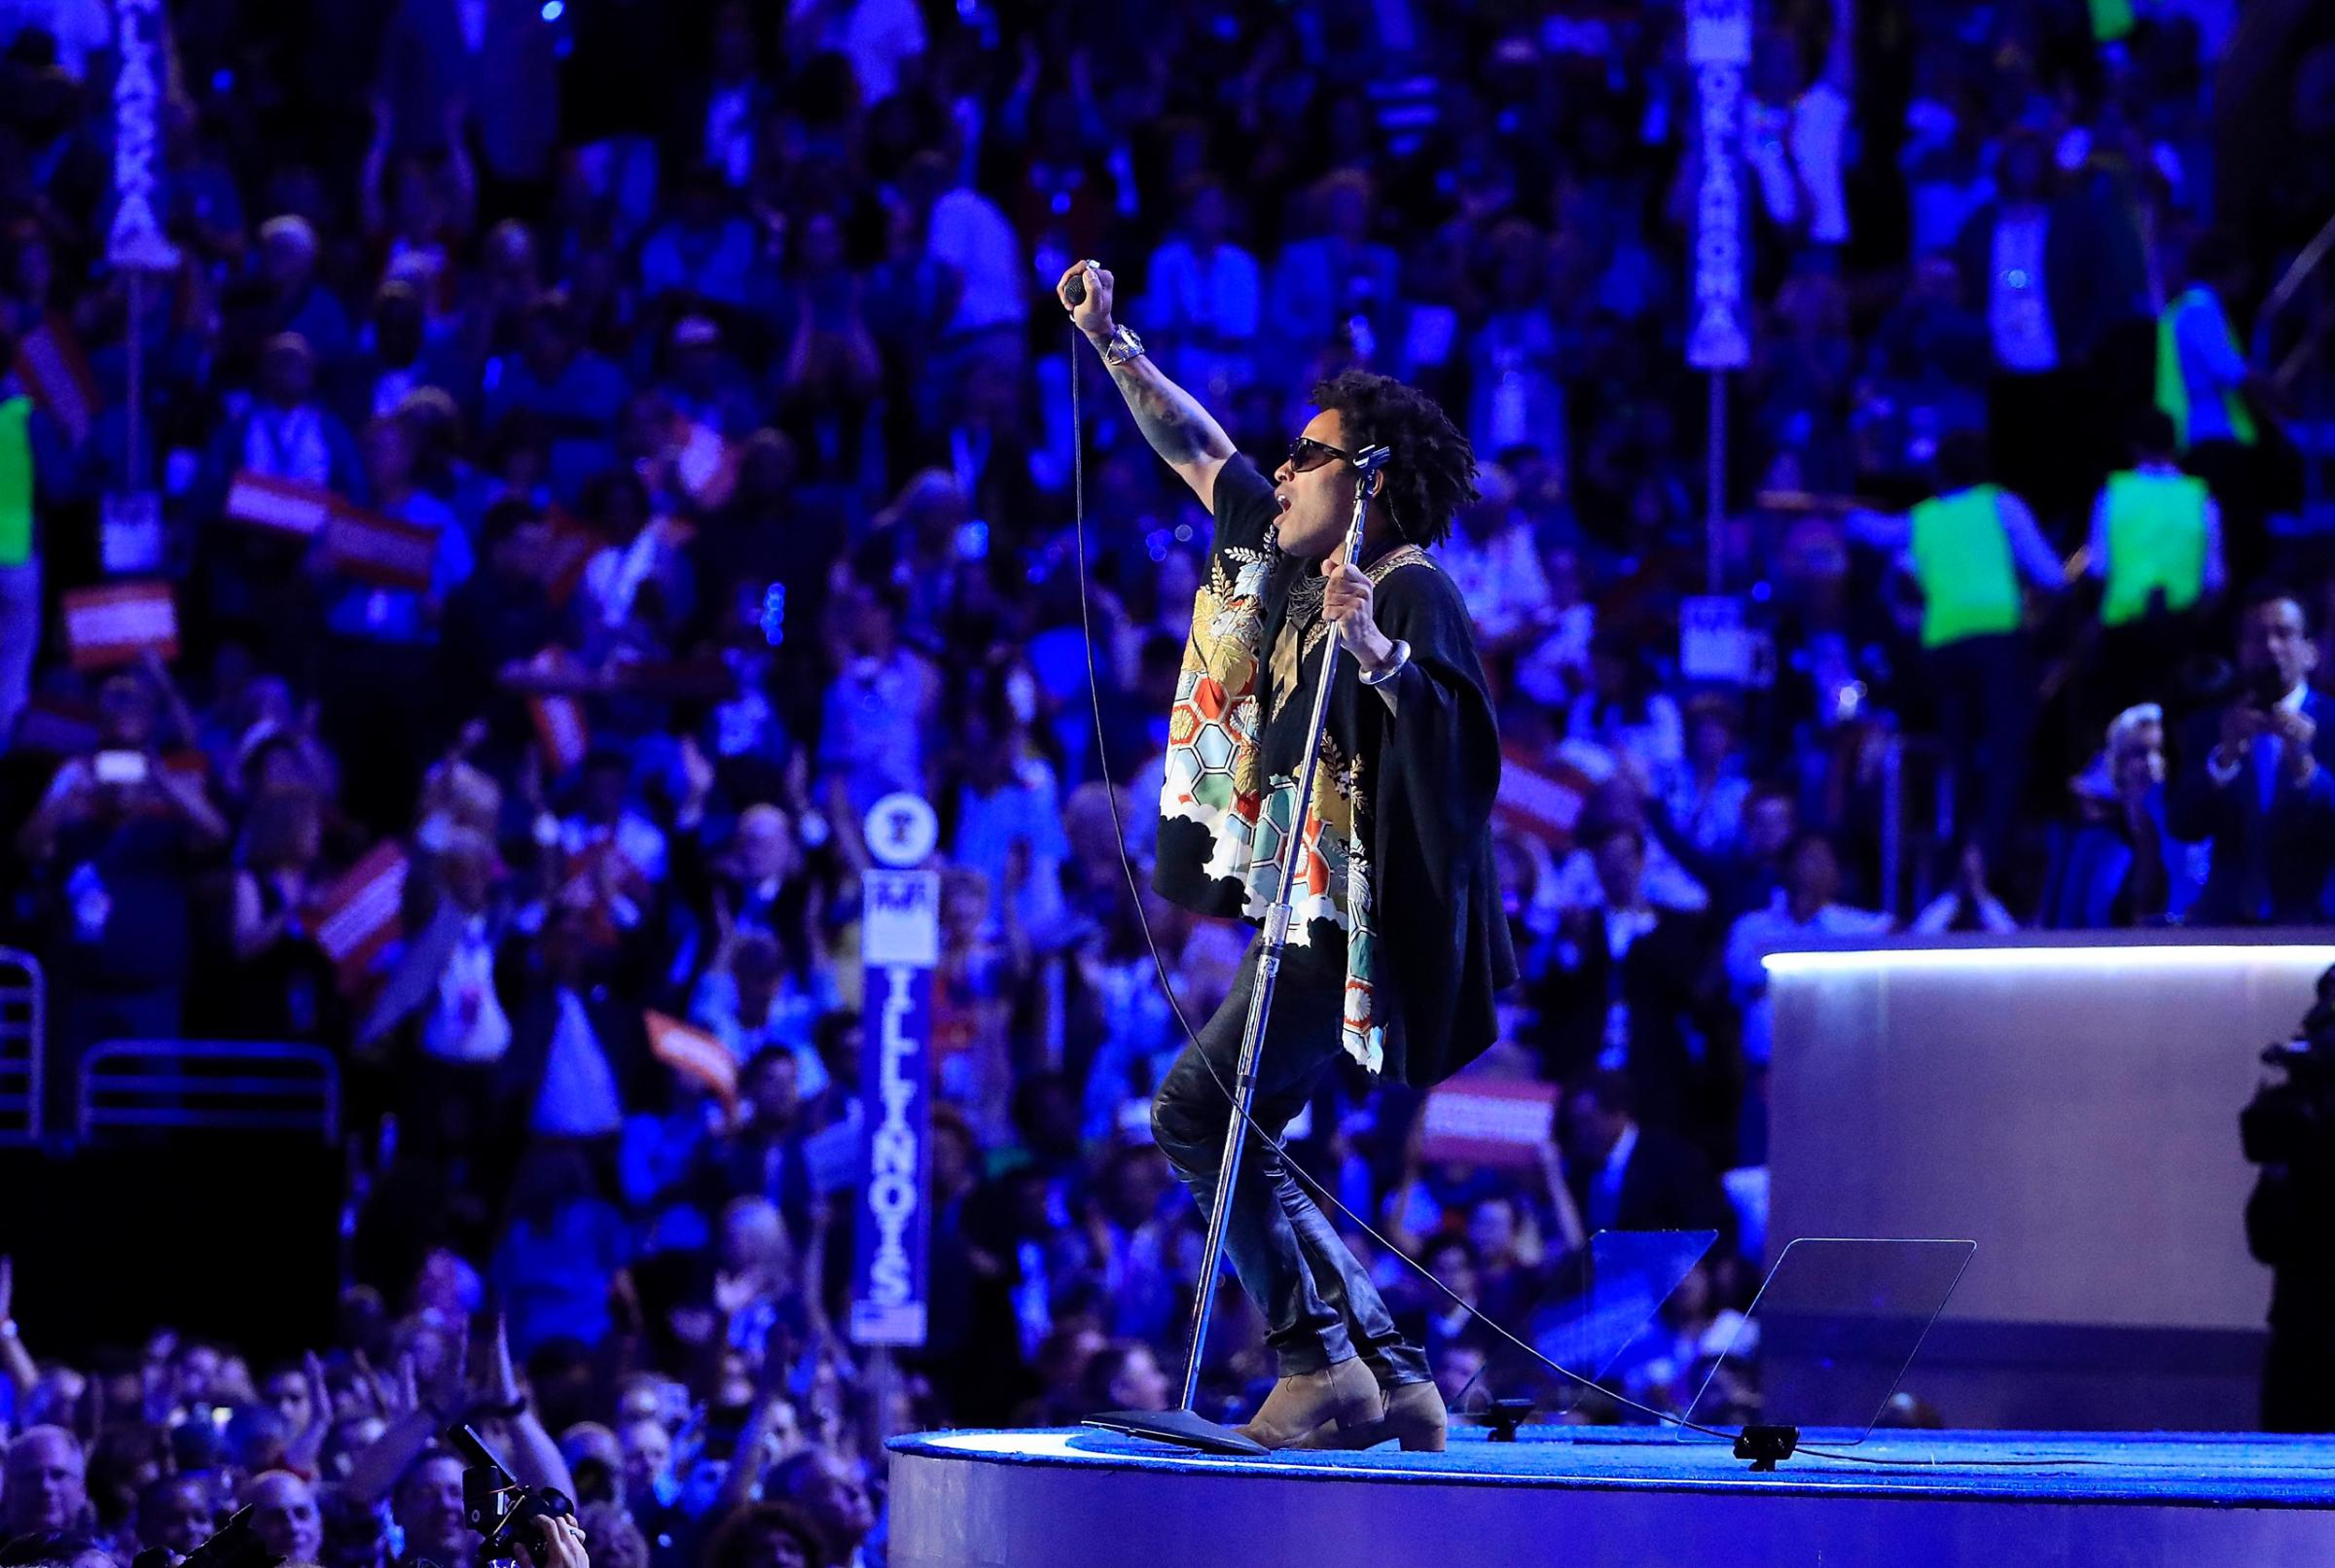 Lenny Kravitz performs during the third day of the Democratic National Convention at the Wells Fargo Center in Philadelphia on July 26, 2016.